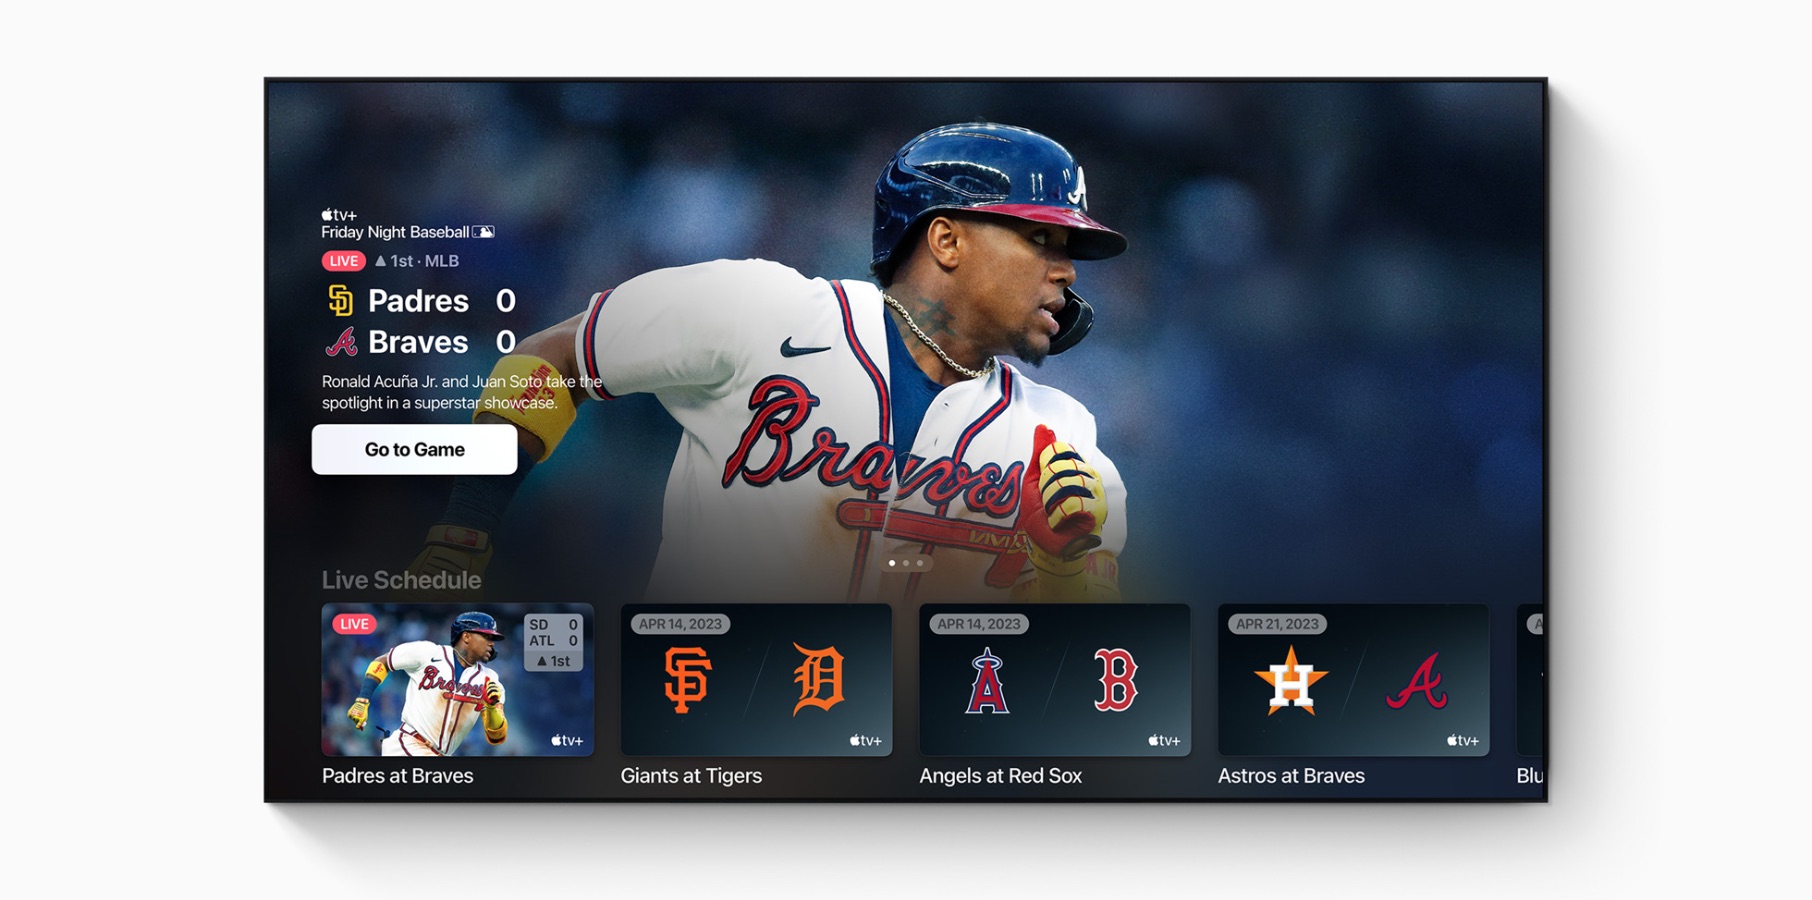 MLB Friday Night Baseball comes back to Apple TV Plus in April